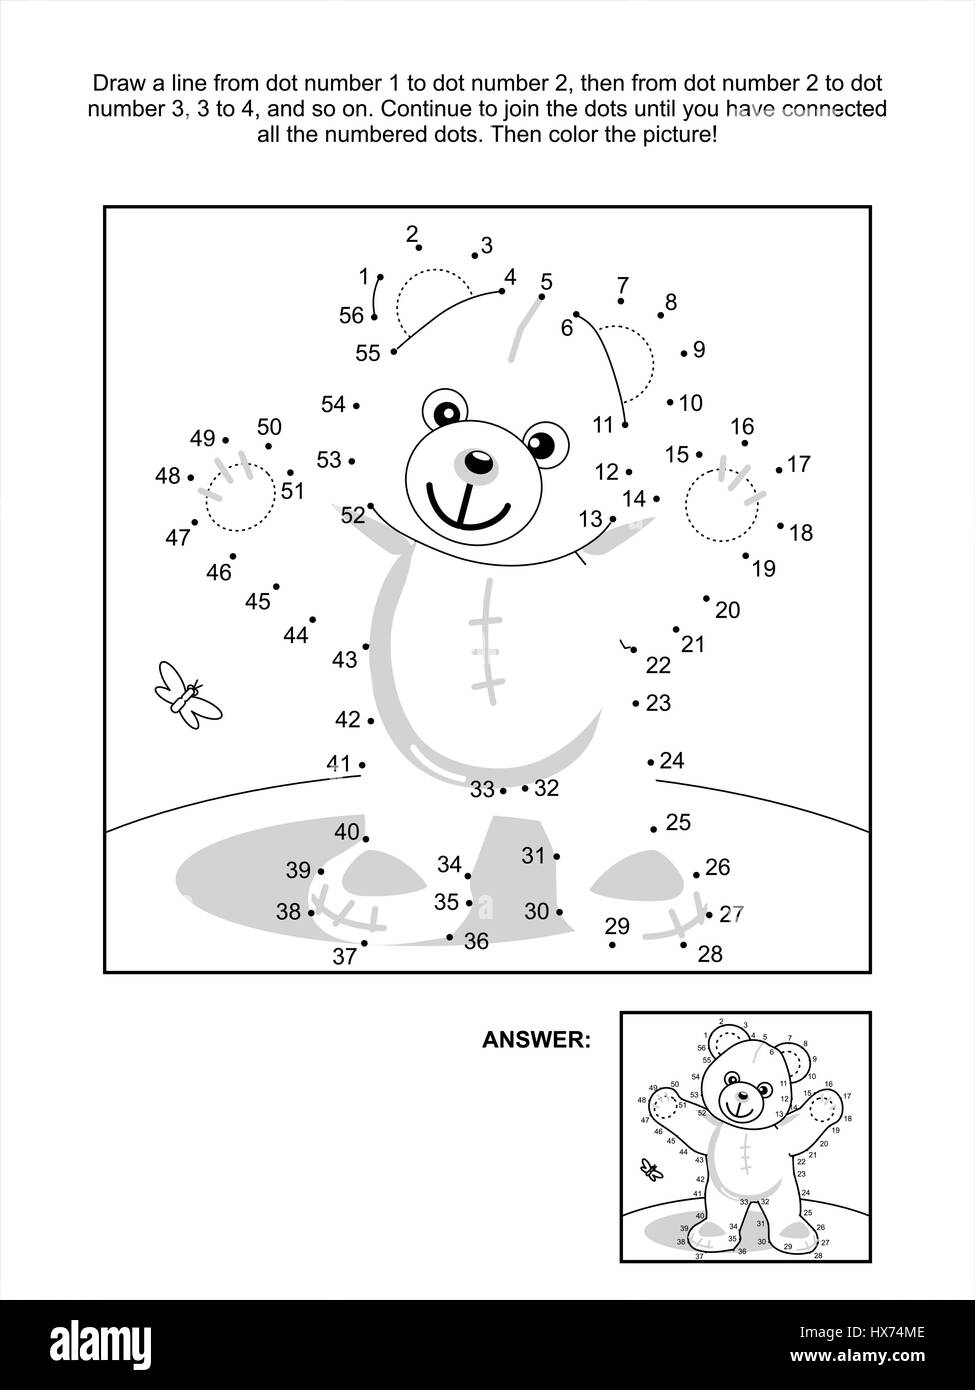 Connect the dots picture puzzle and coloring page - teddy bear. Answer included. Stock Vector